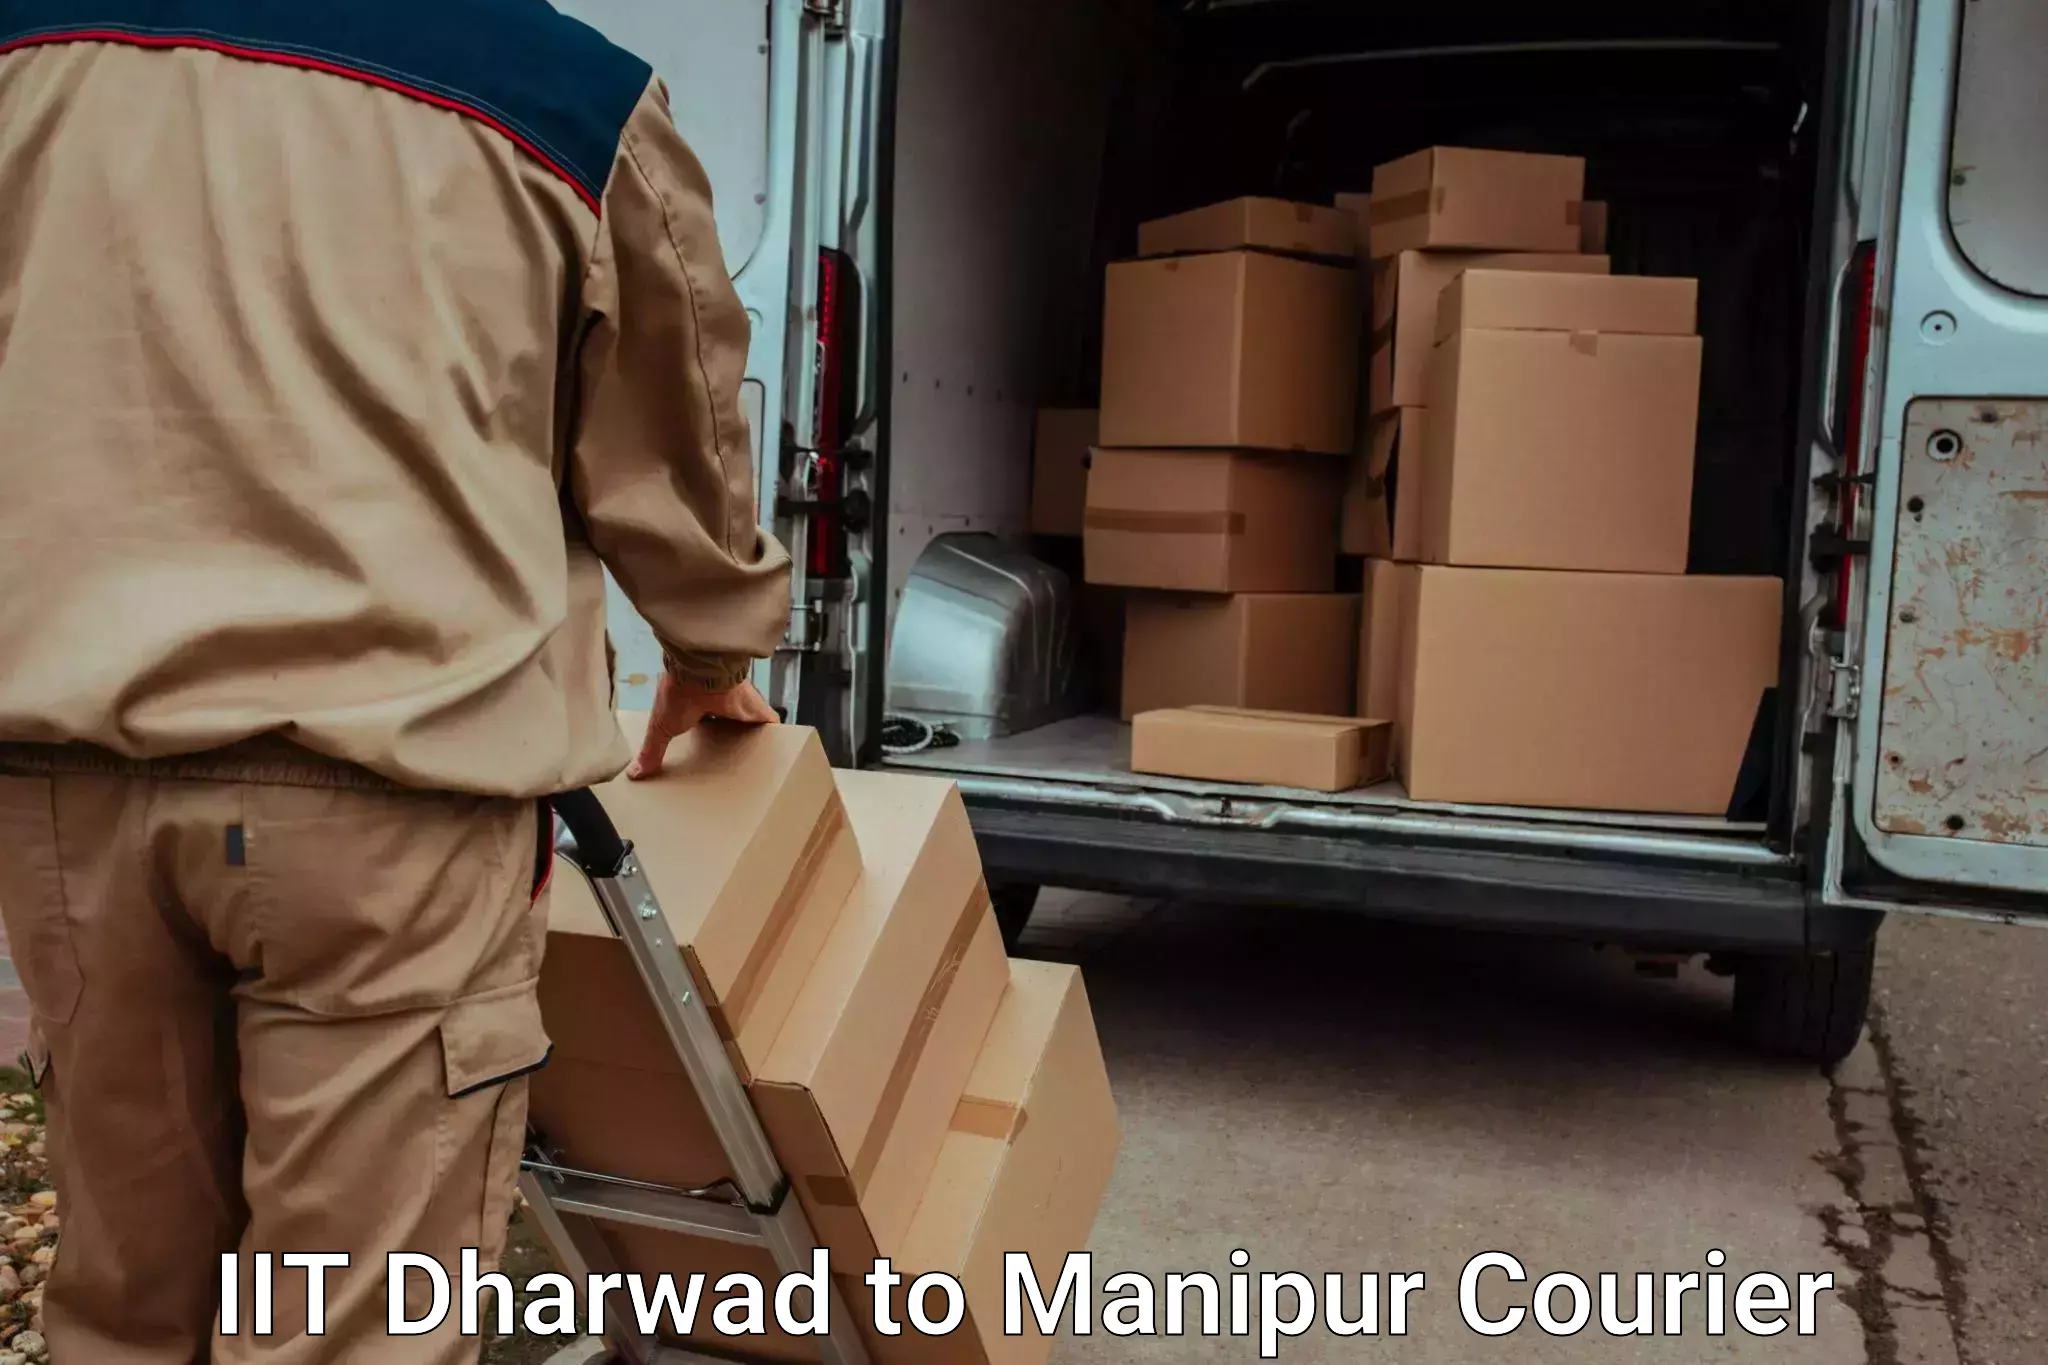 Baggage relocation service IIT Dharwad to Imphal